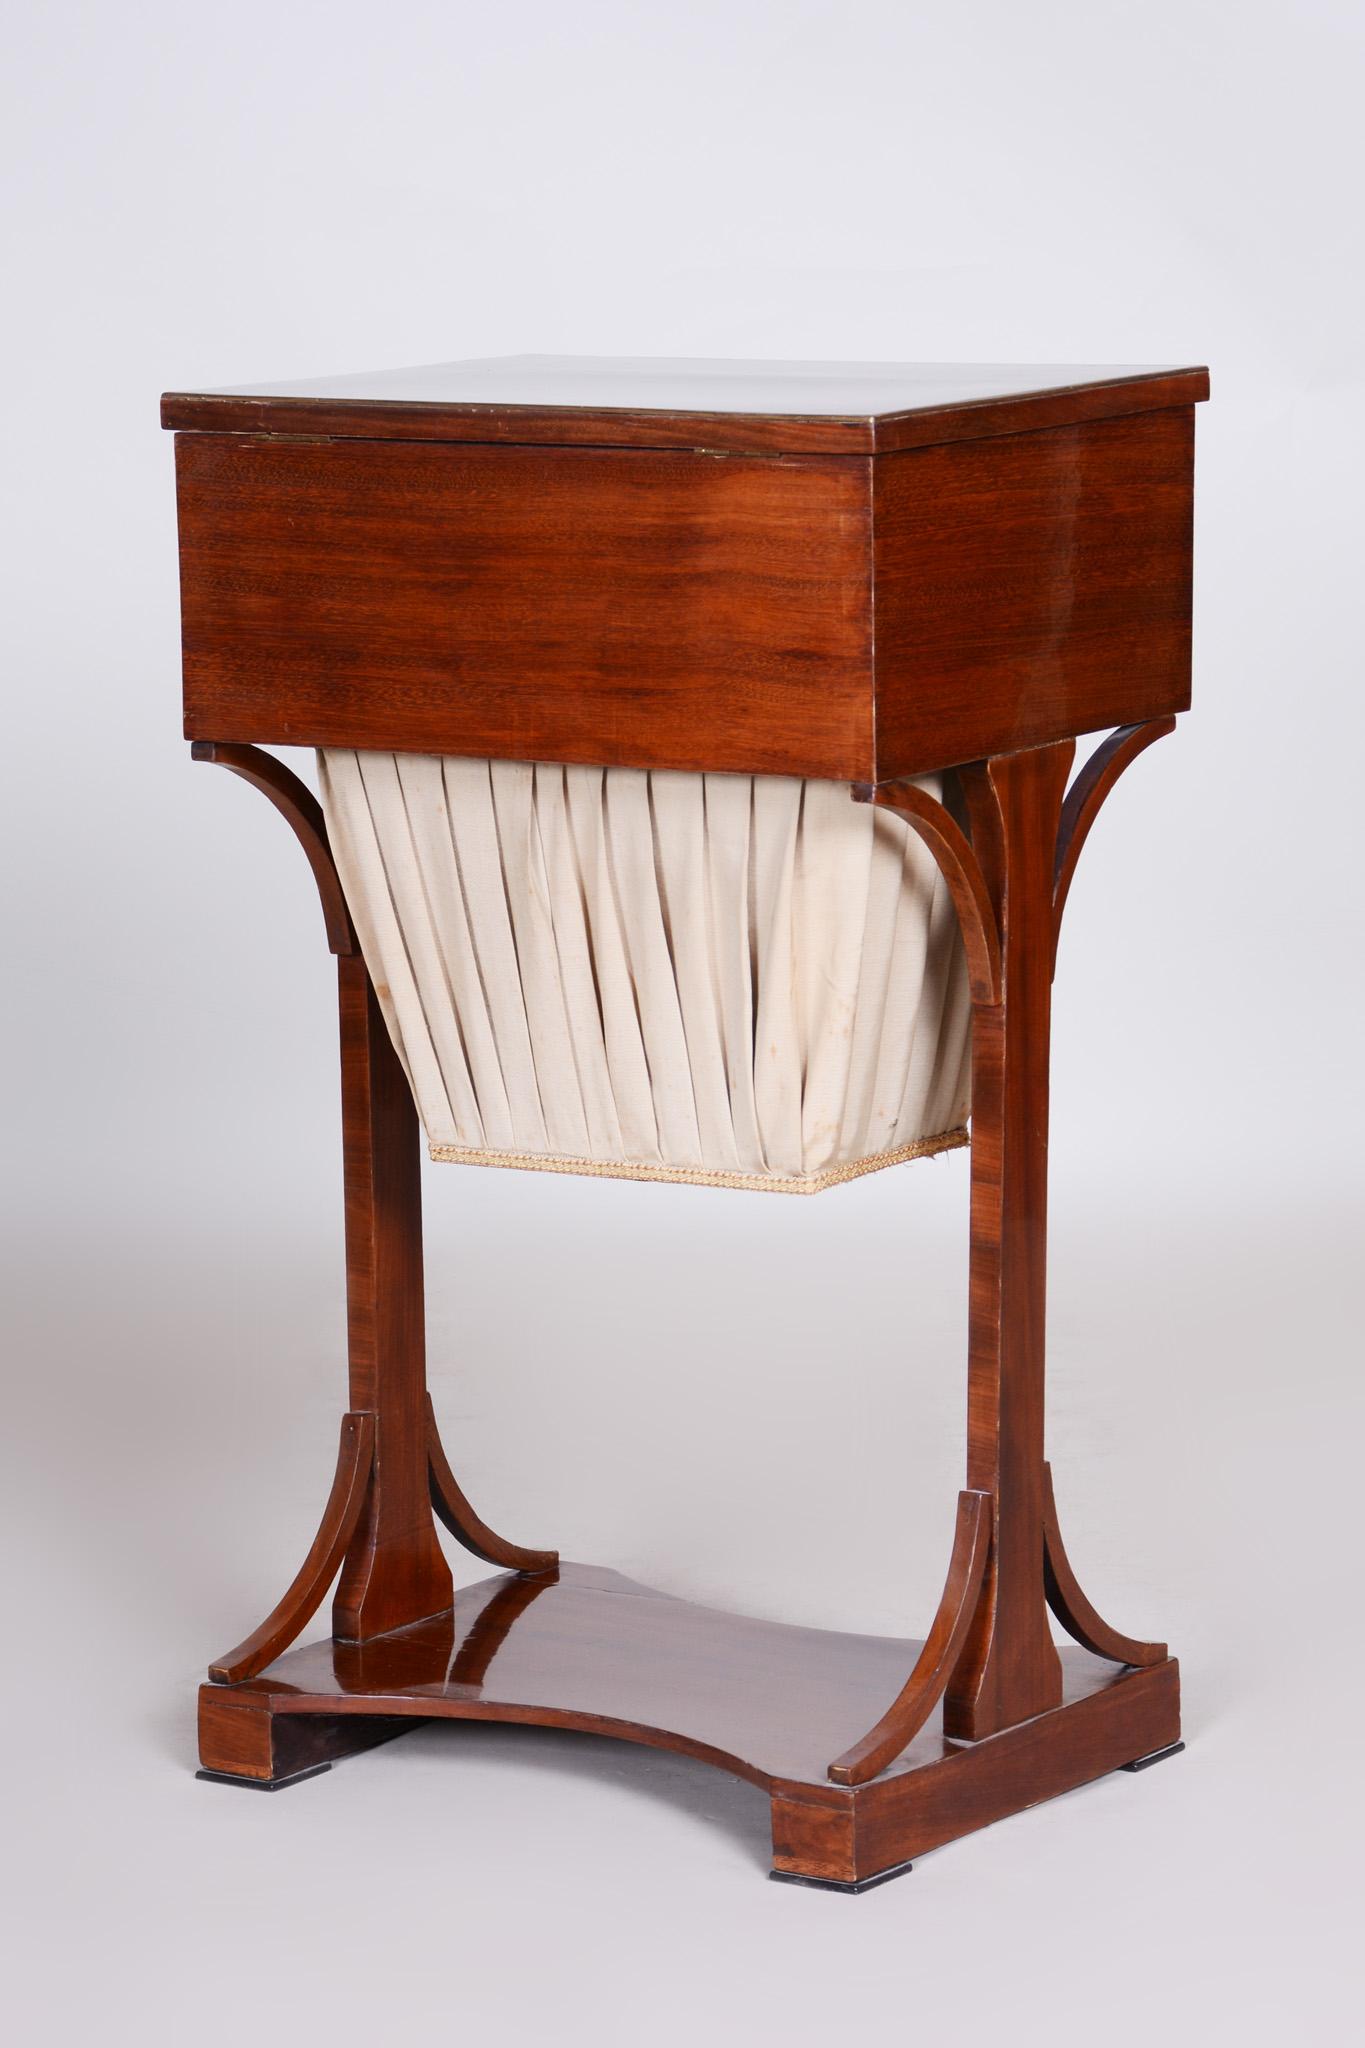 19th Century Restored German Biedermeier Table, Made with Mahogany, 1820s For Sale 11